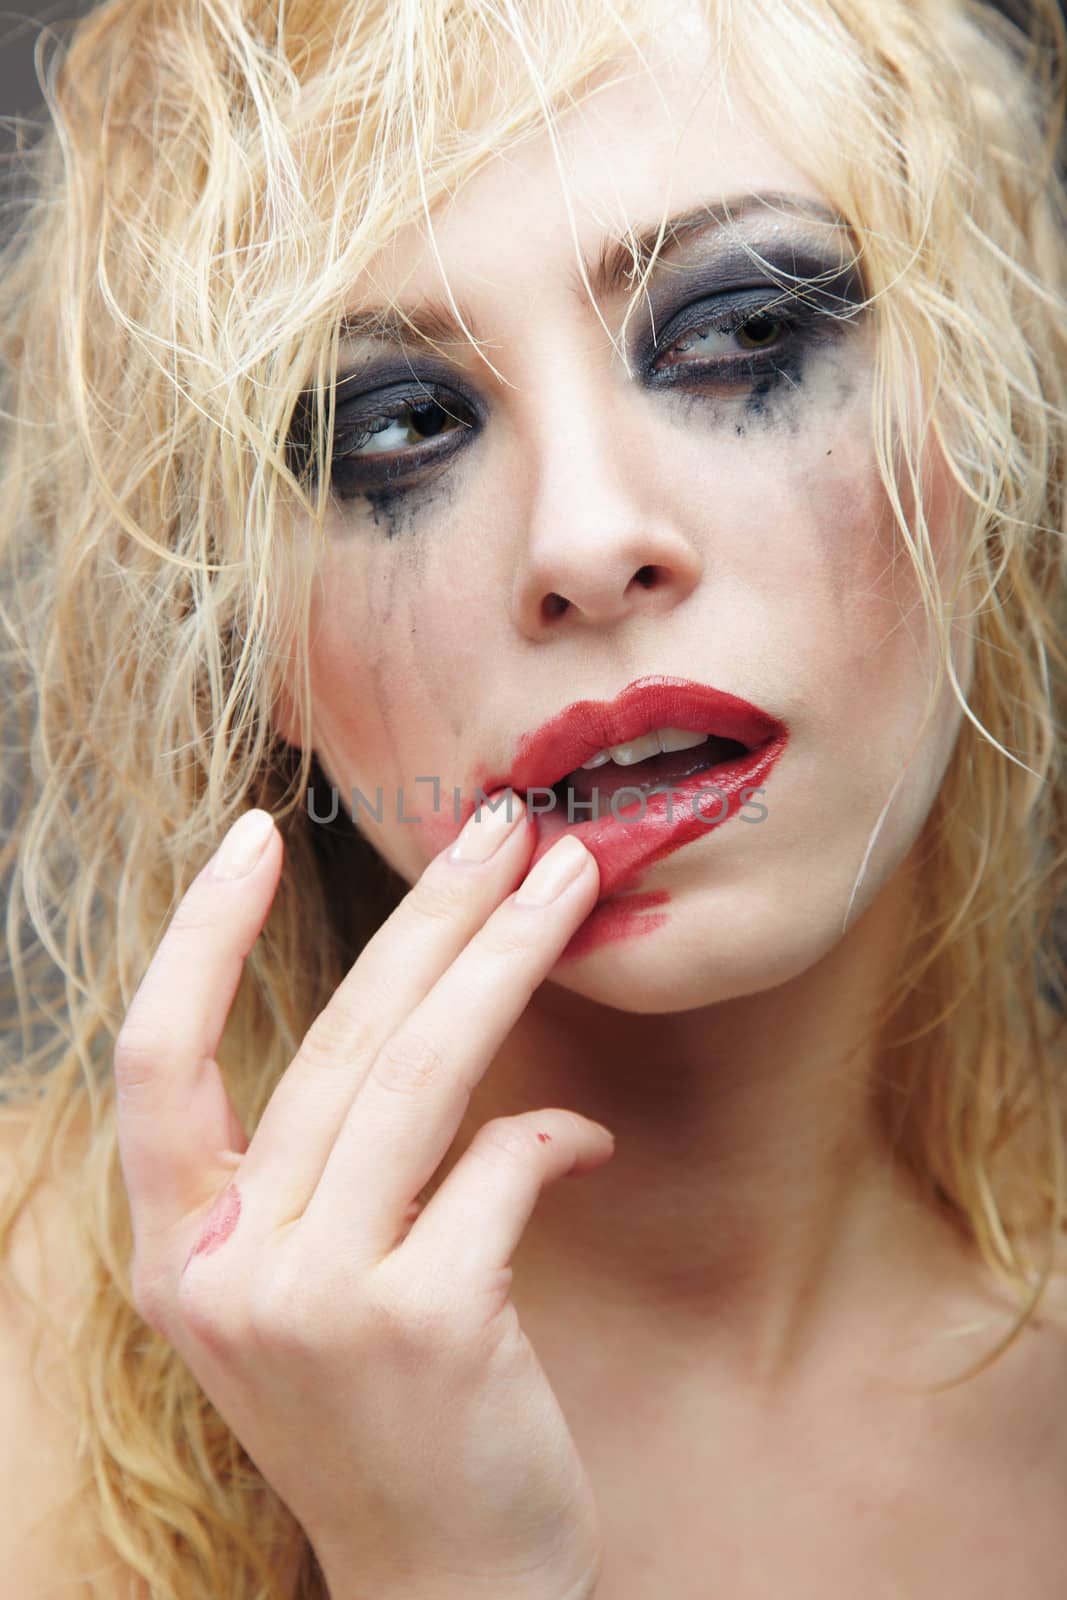 Beautiful blond lady with strange makeup smearing lipstick. Artistic colors added